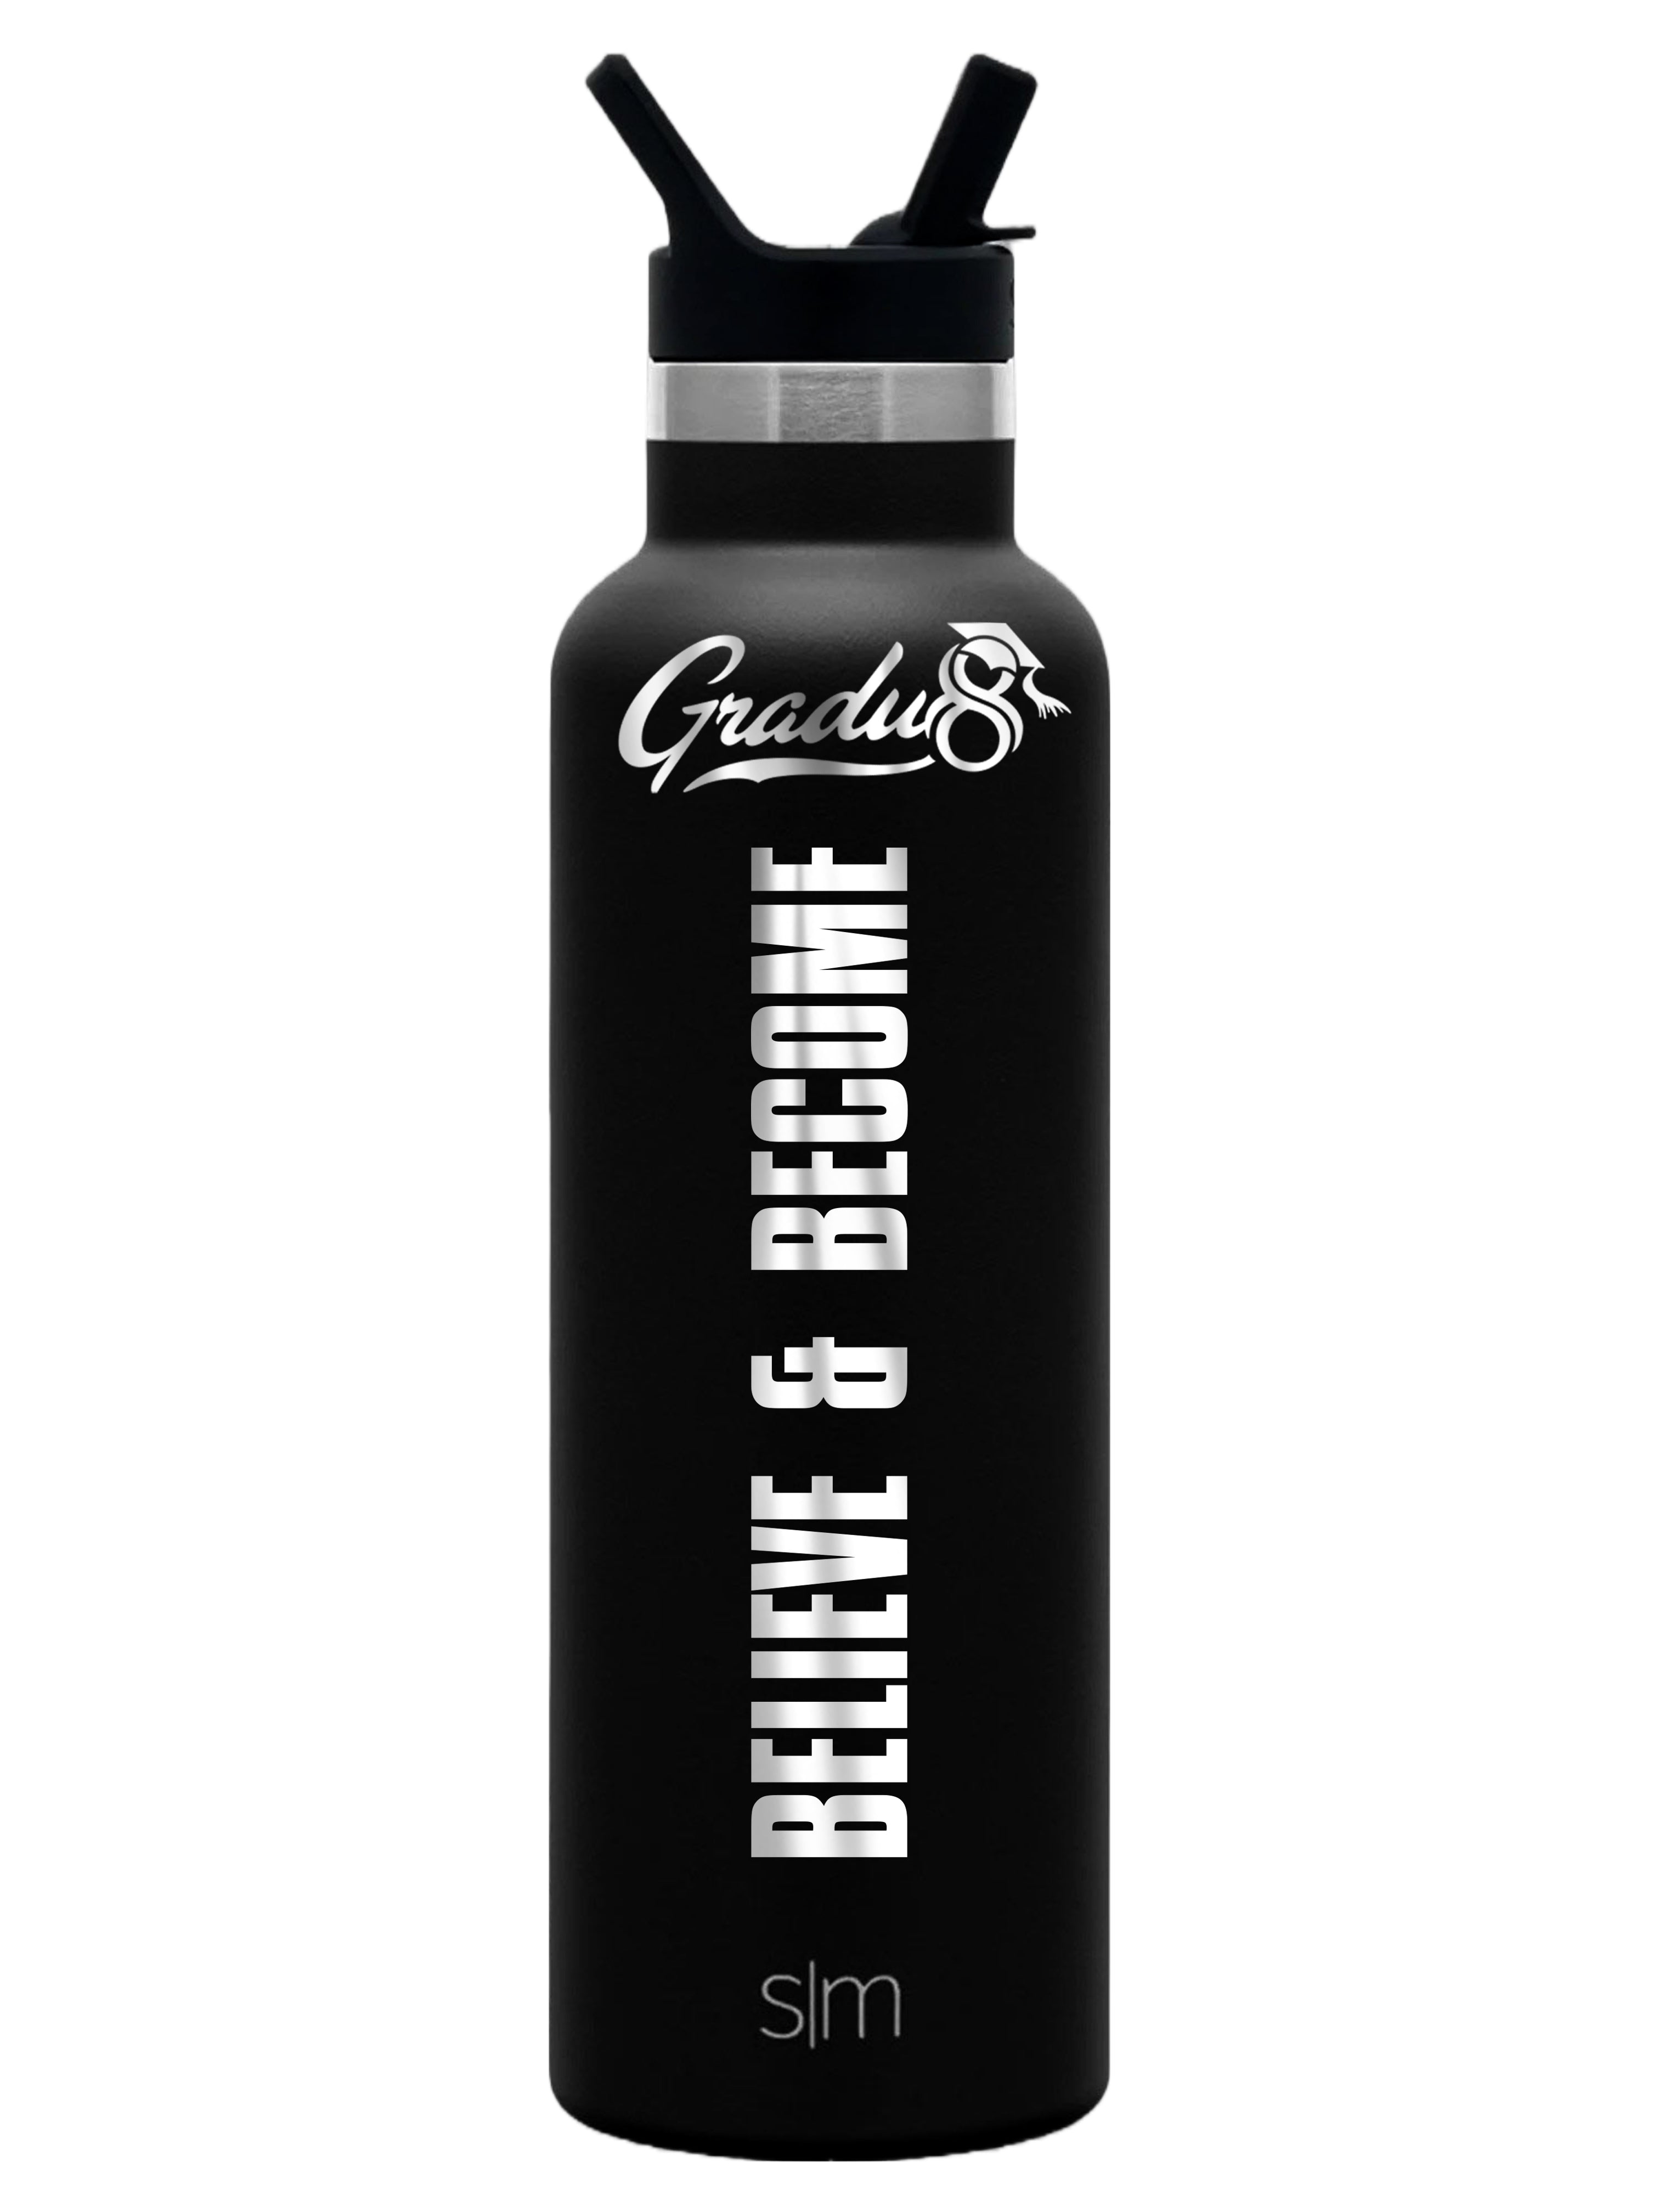 Gradu8 Believe & Become Ascent Water Bottle with Straw Lid - 20oz